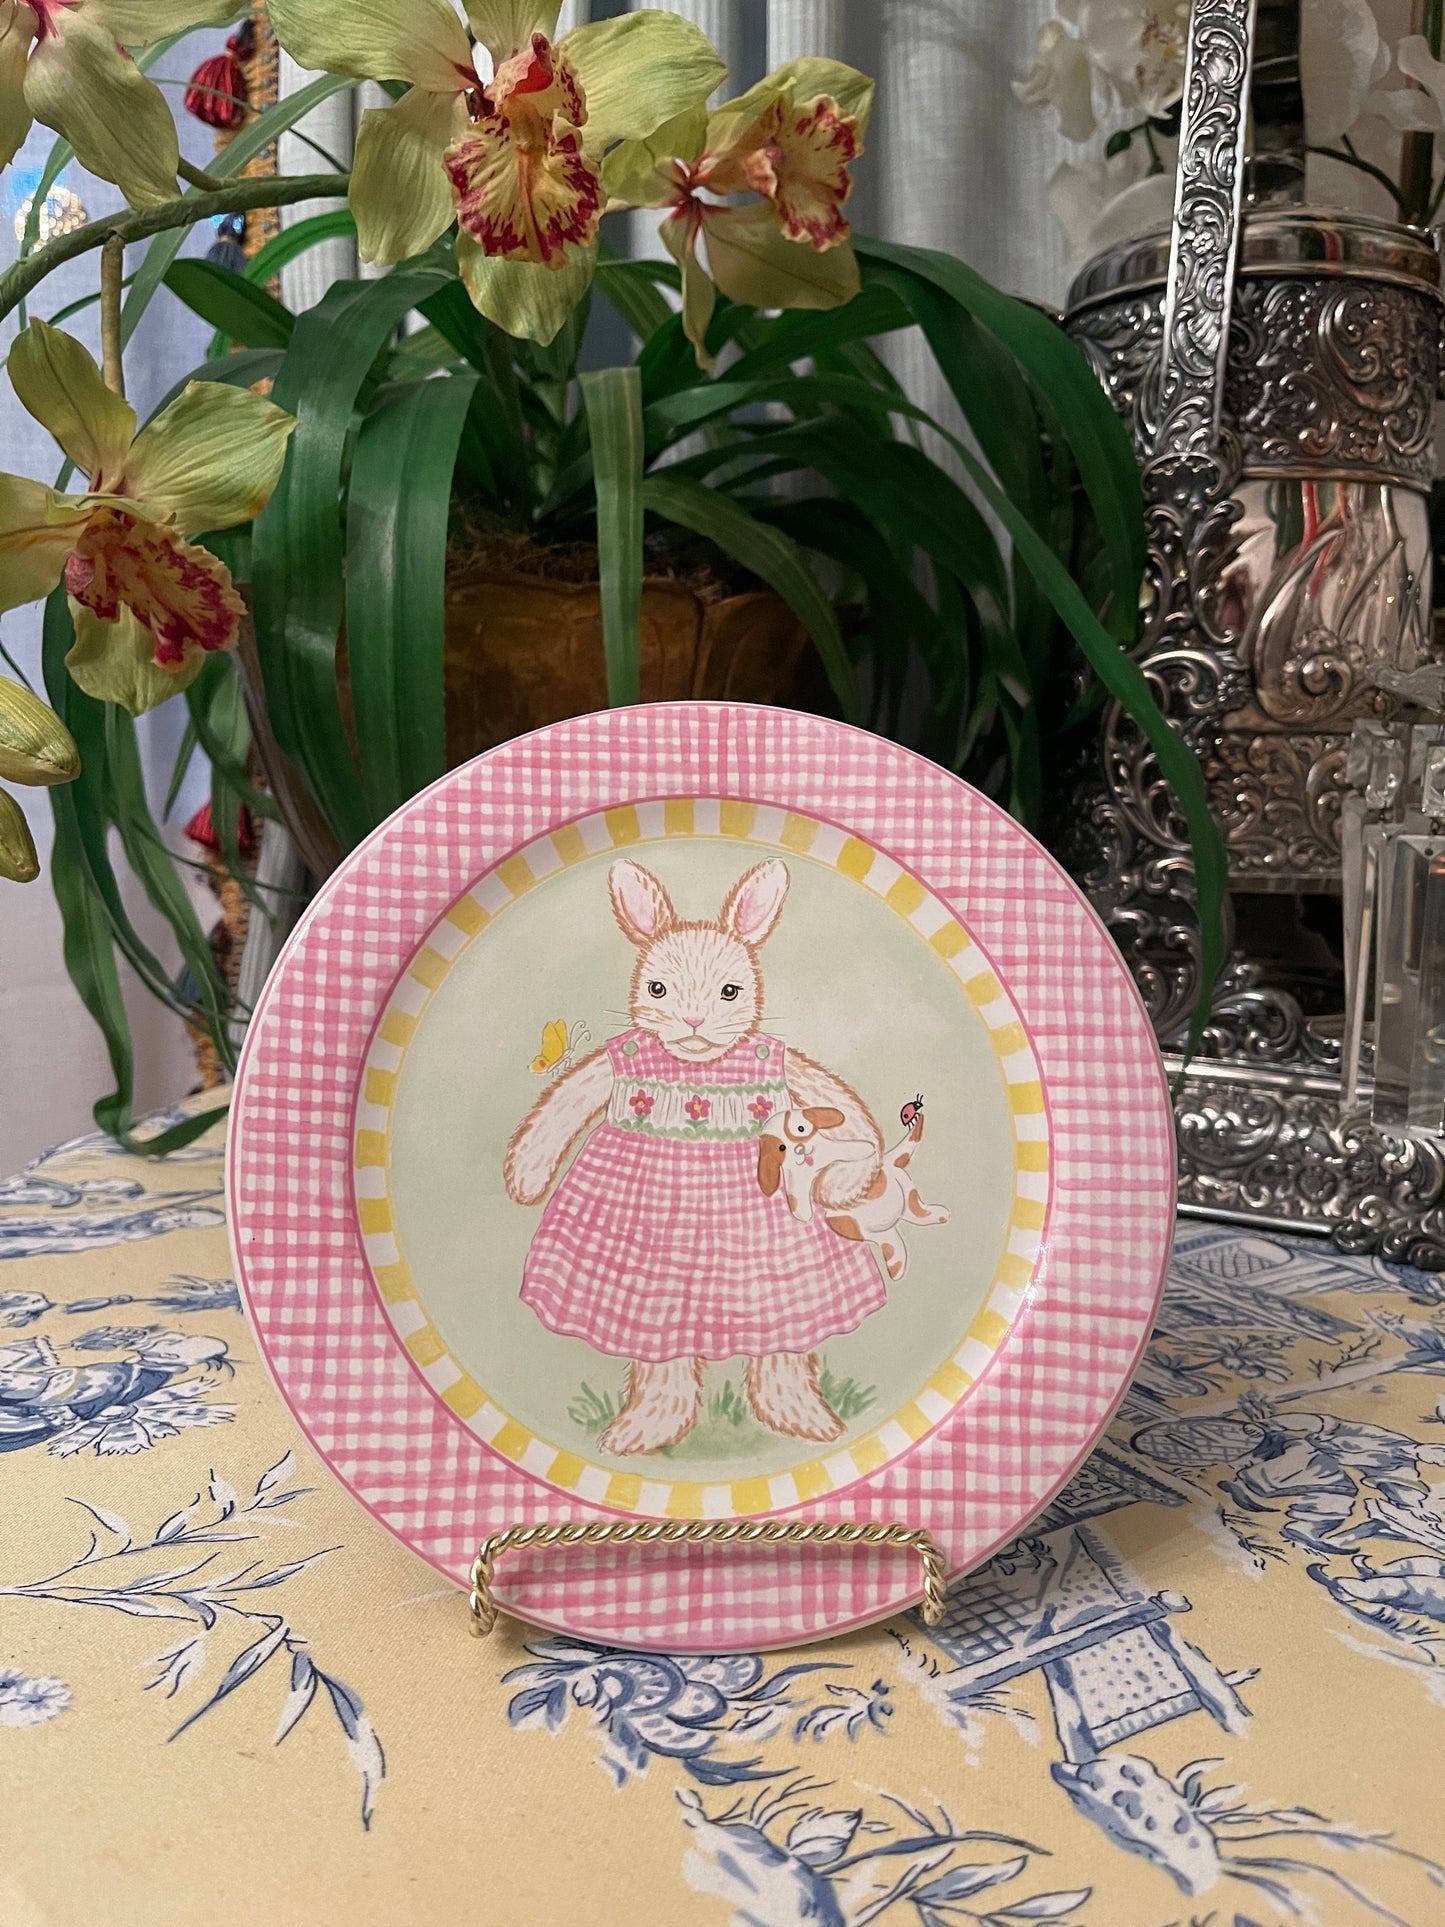 Darling Kelly B Rightsell Bunny in Pink Smocked Dress Plate - Lighter Pink- Made in Portugal